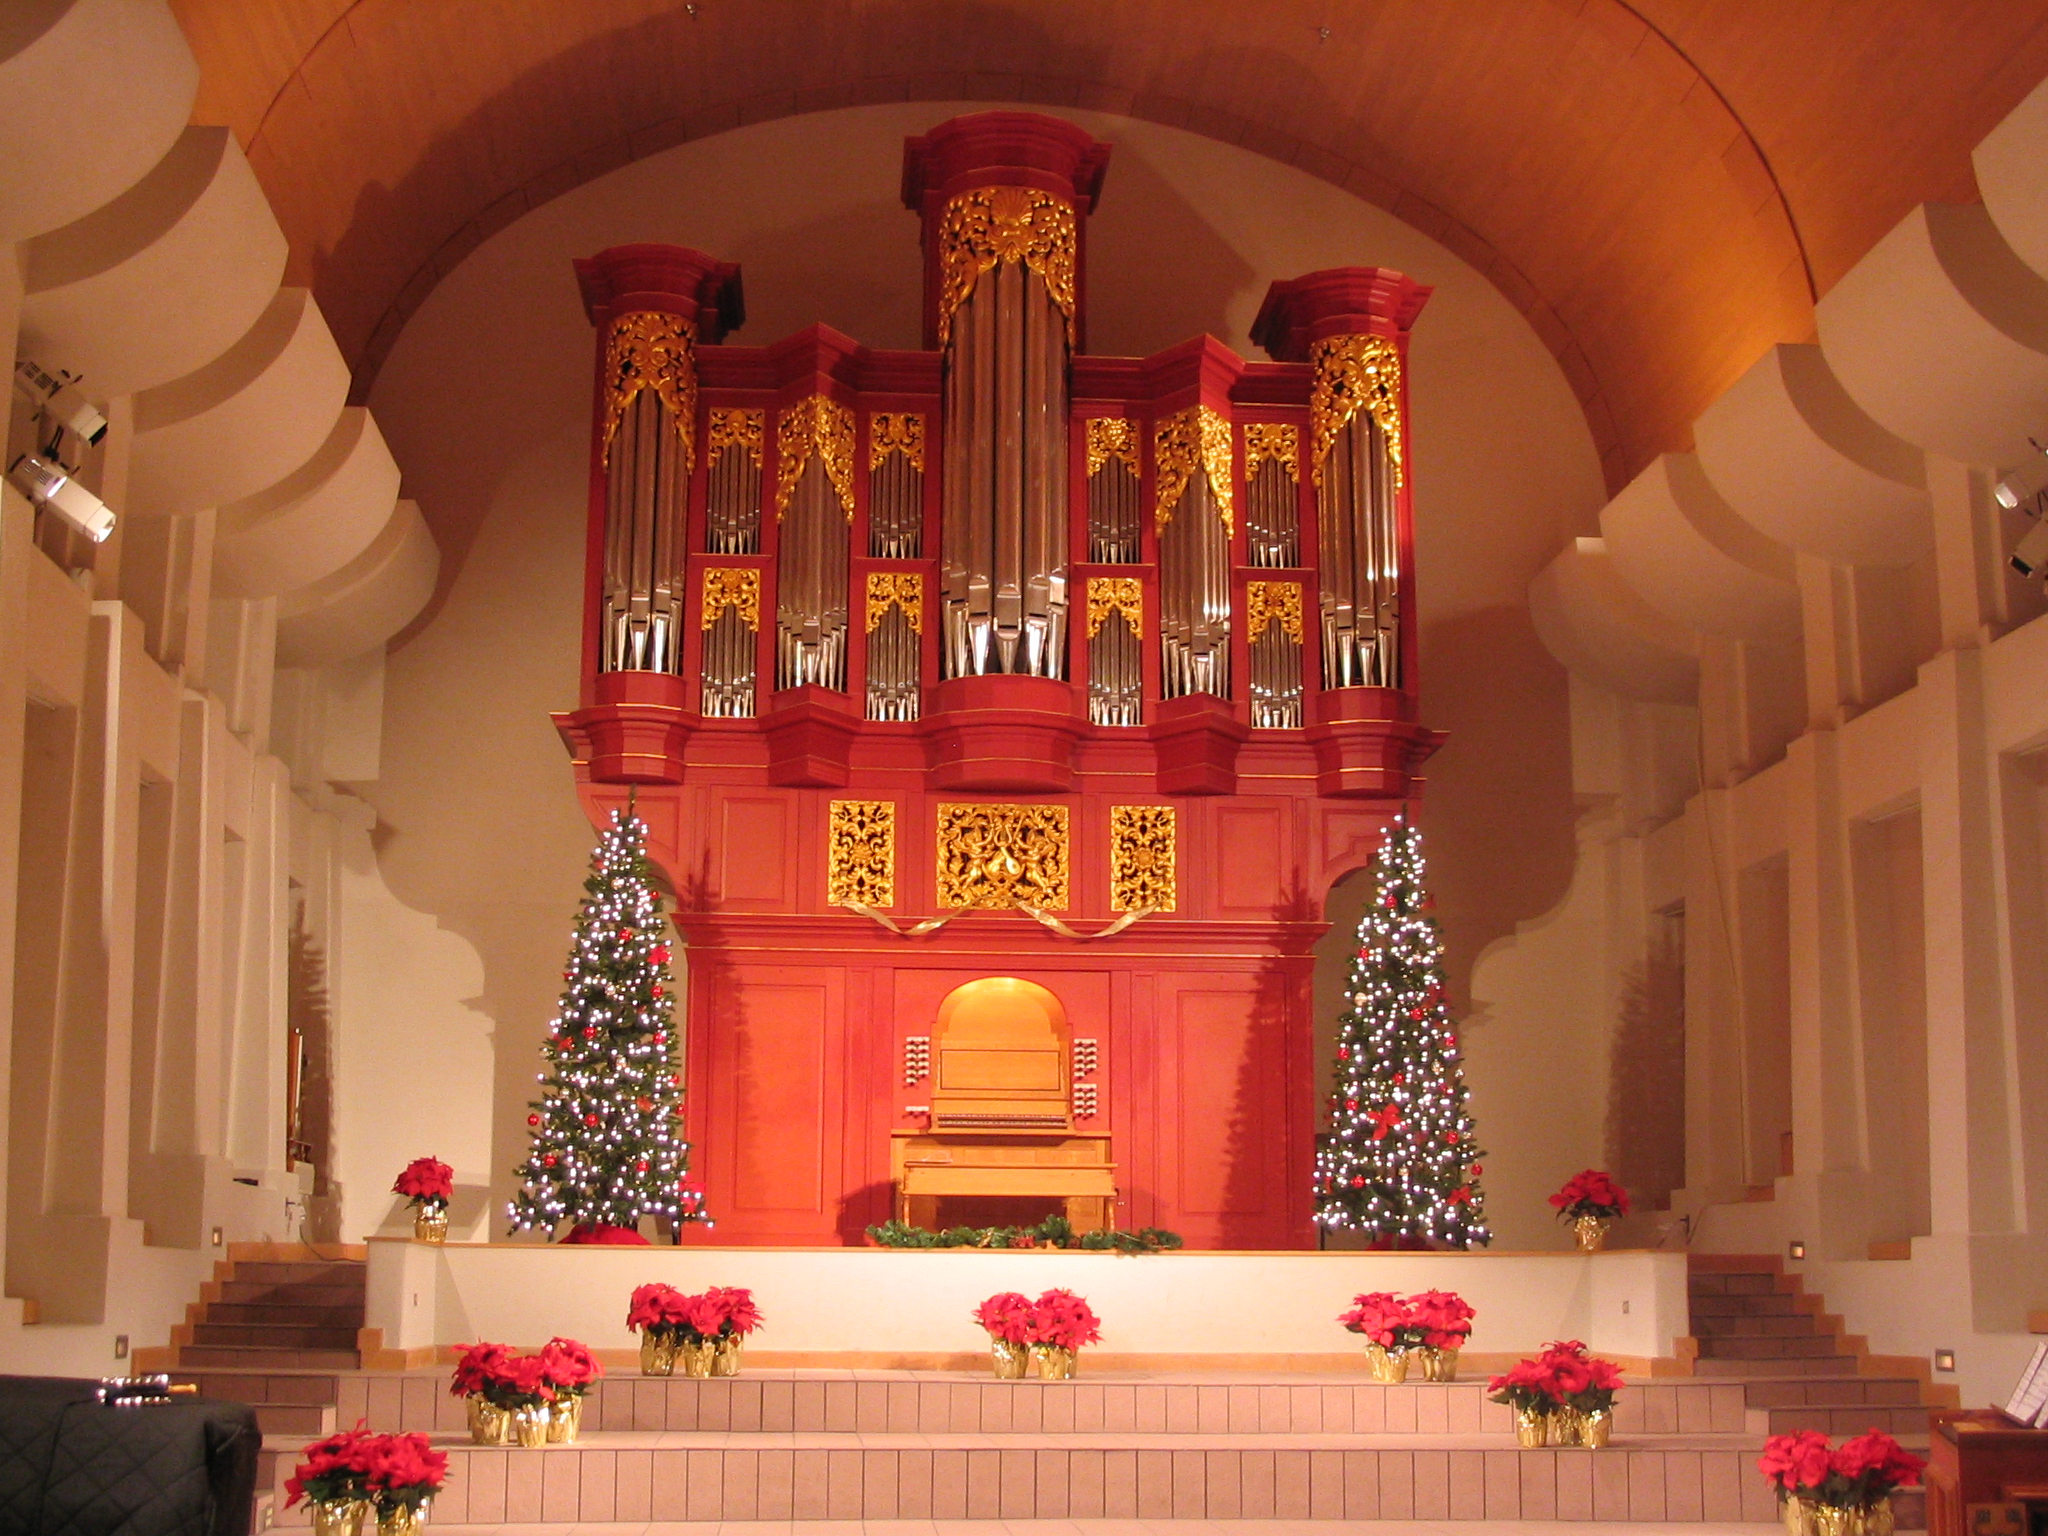 Photo of the Organ Hall decorated for Christmas